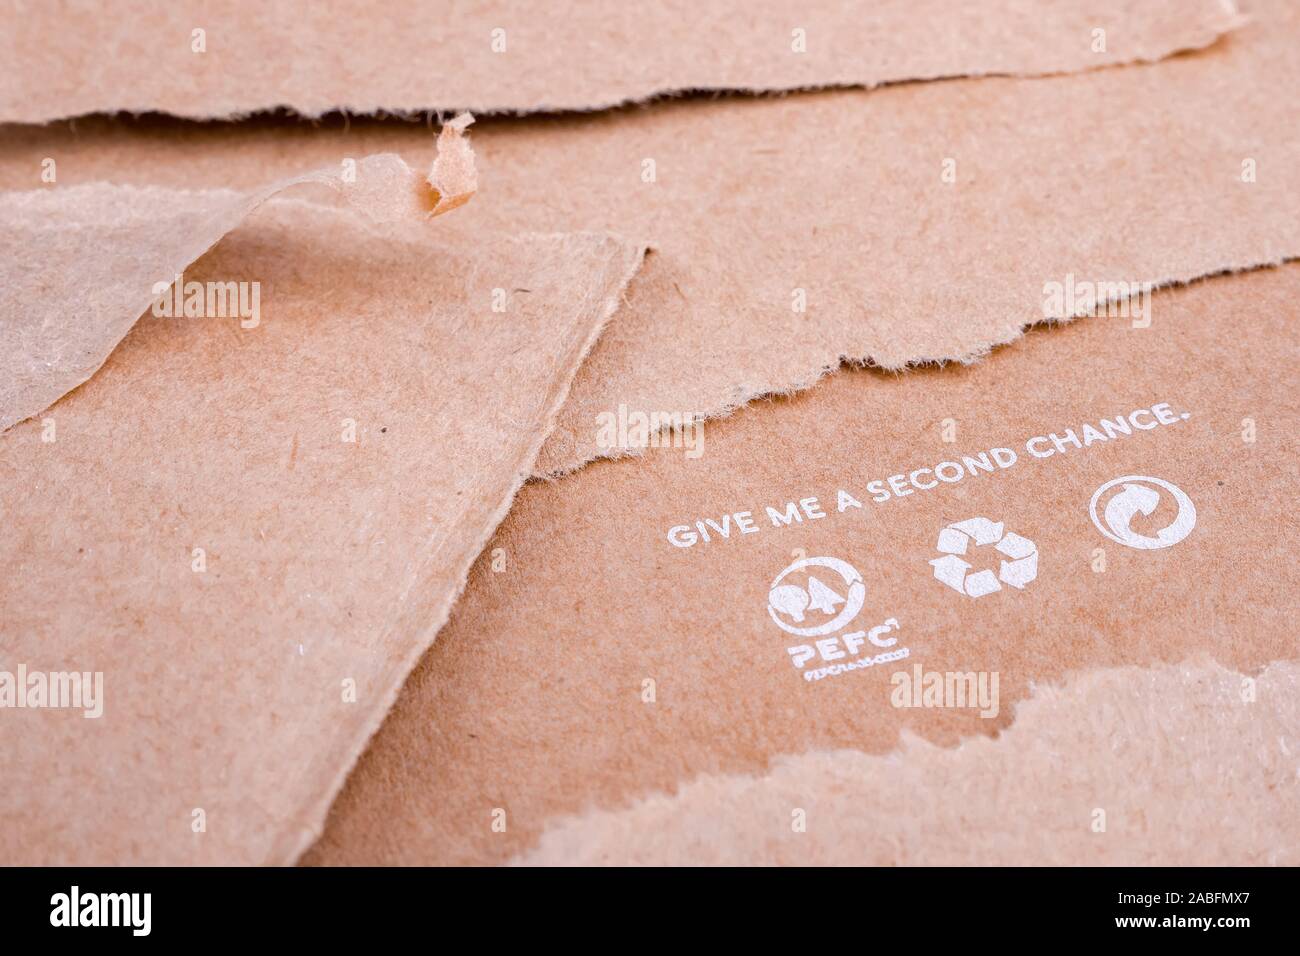 Wastepaper background. Reuse background. Words on craft paper. Give me a second chance. World resources concept. Reusing paper-based products. Ecological problems. Reusing concept Stock Photo